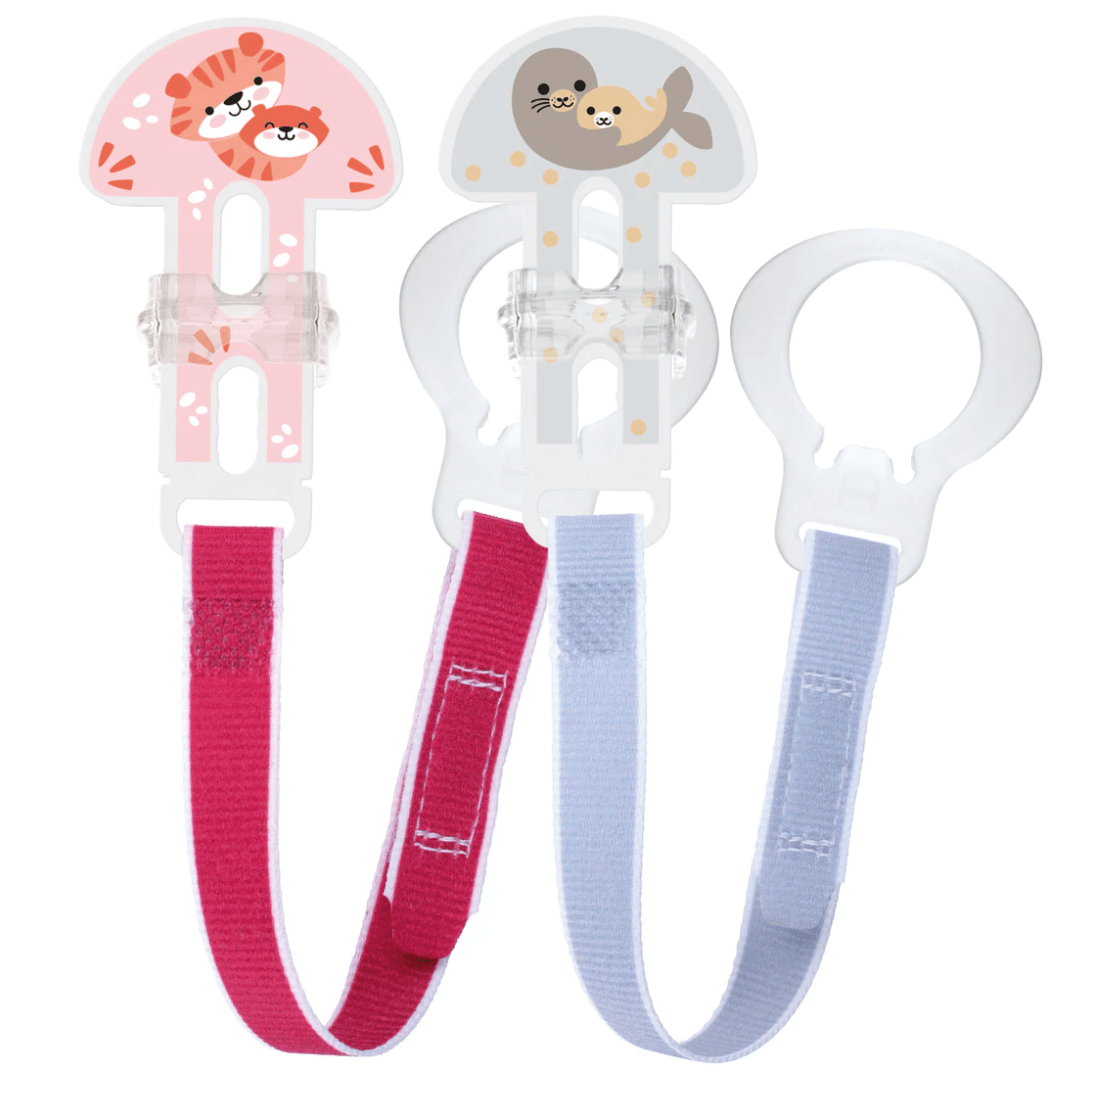 MAM Soother Clip Girl Mam Double Clip Set - for Soothers & Teethers